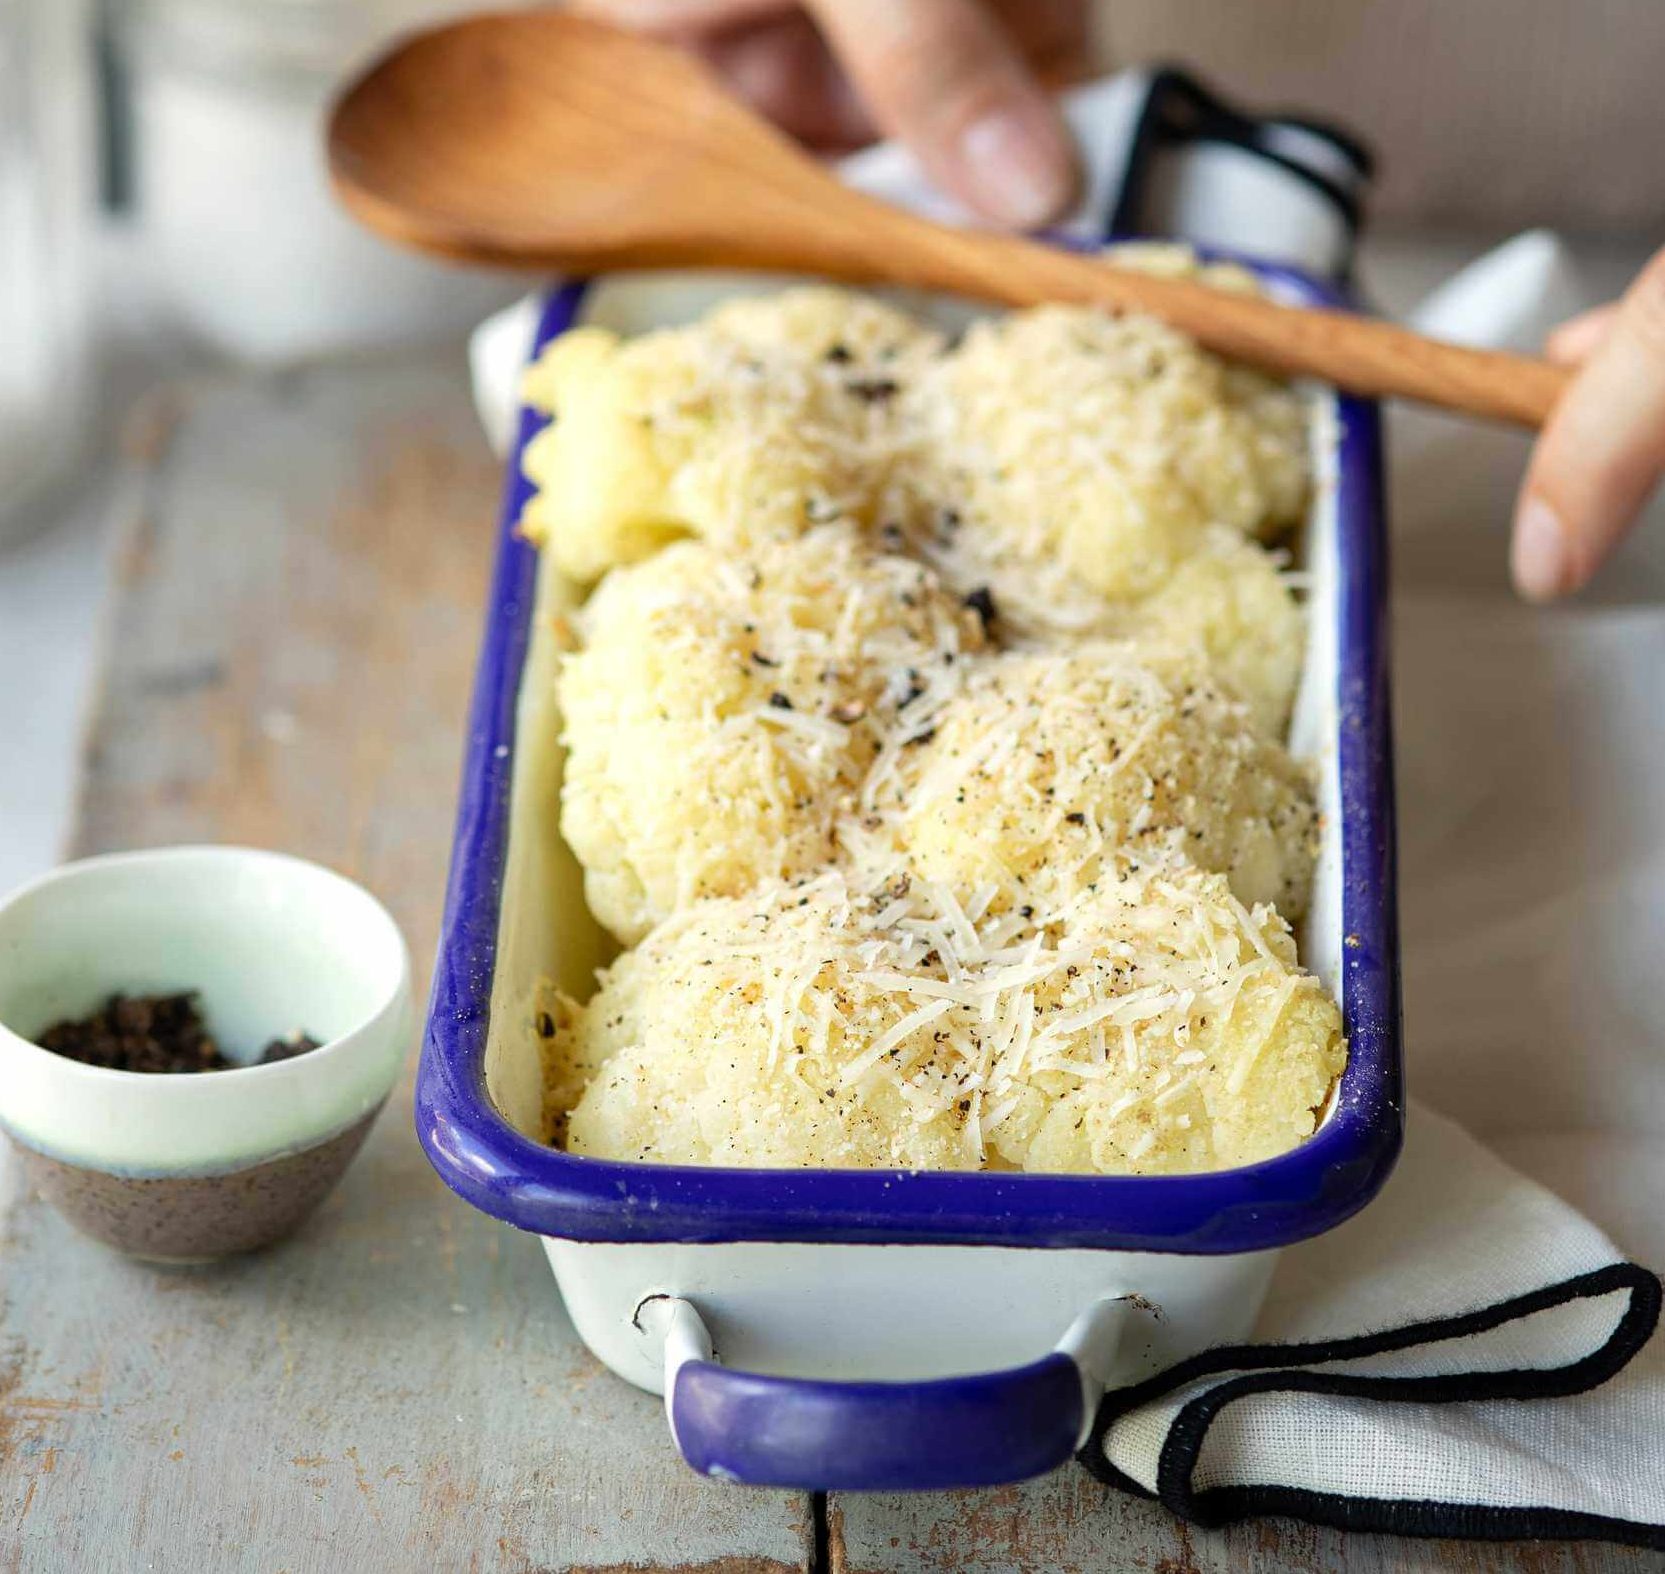 A person holding a baking dish with cauliflower and cheese.